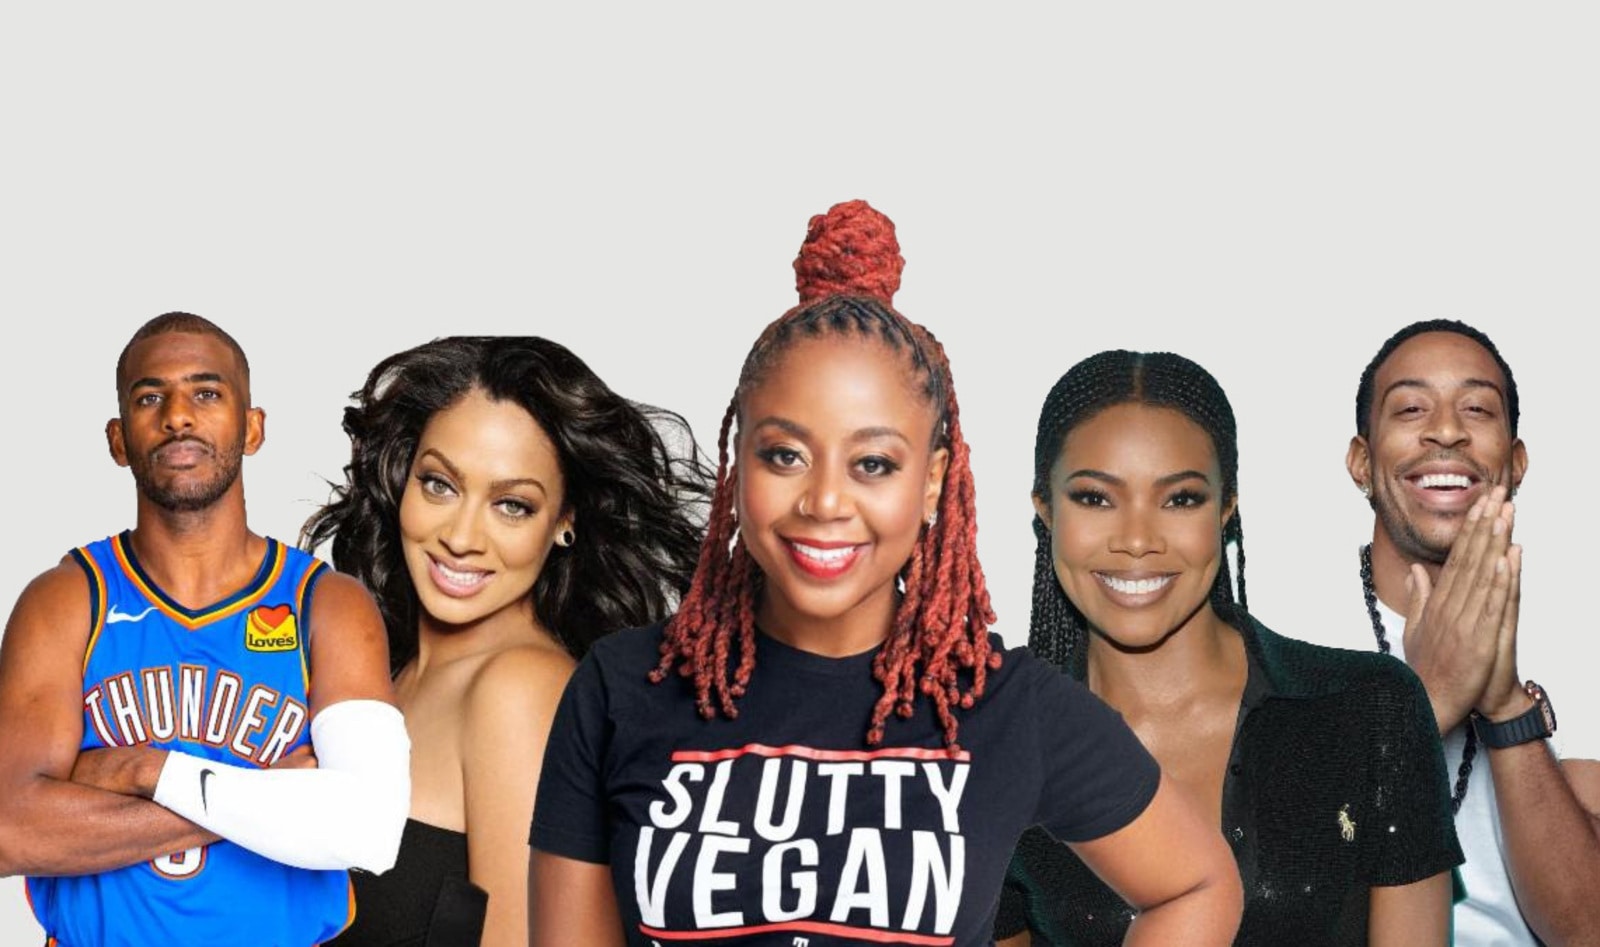 Slutty Vegan’s Food Will Be Free for One Day Thanks to Ludacris, La La Anthony, Chris Paul, and Gabrielle Union-Wade